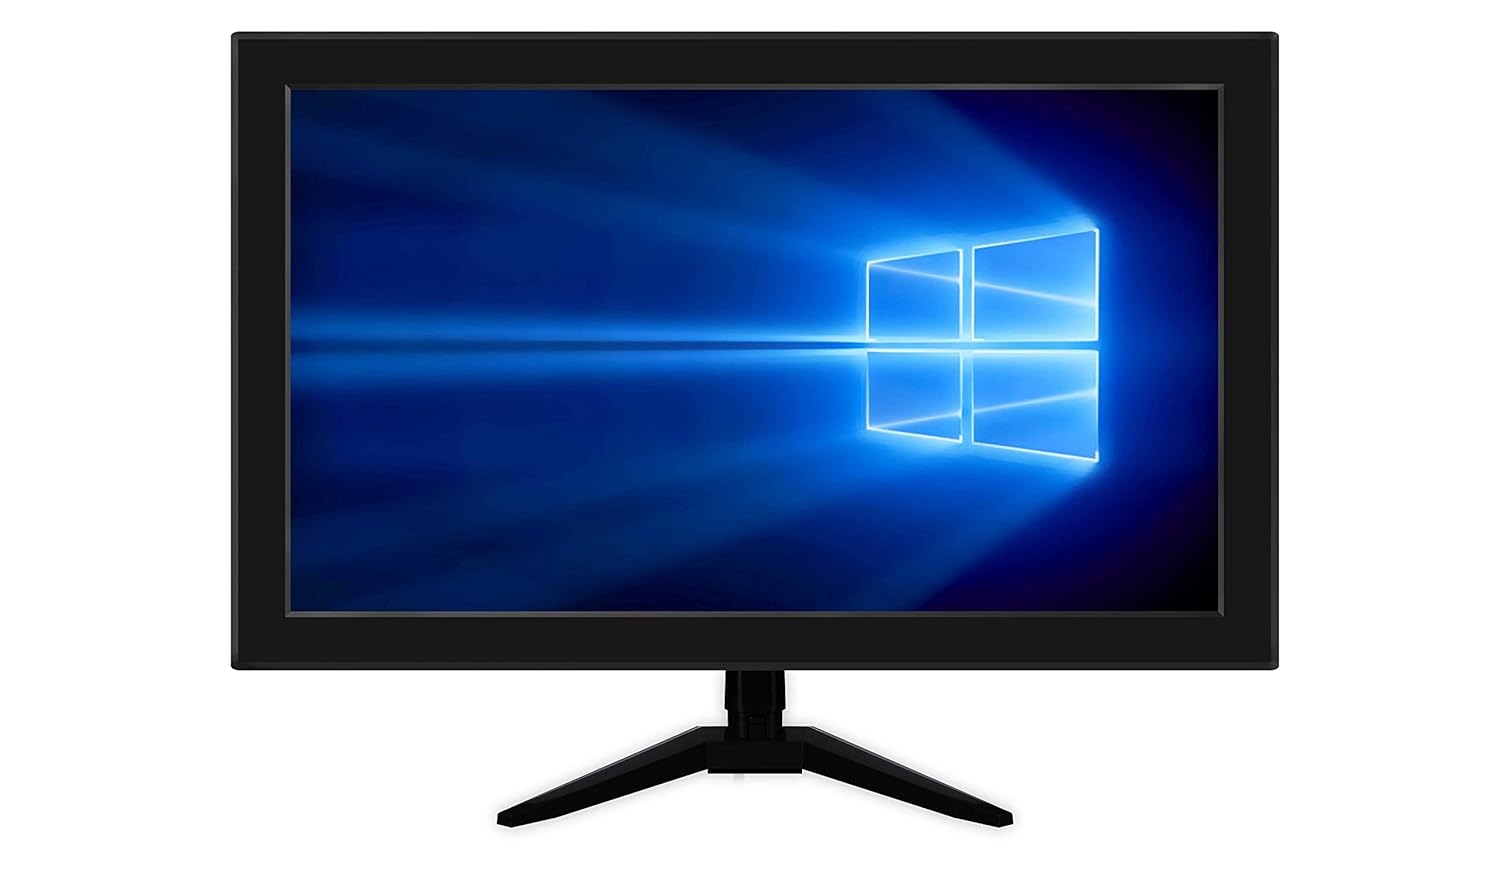 Consistent 15.4 Wide Display With Hdmi, Led Monitor (Ctm 1509)